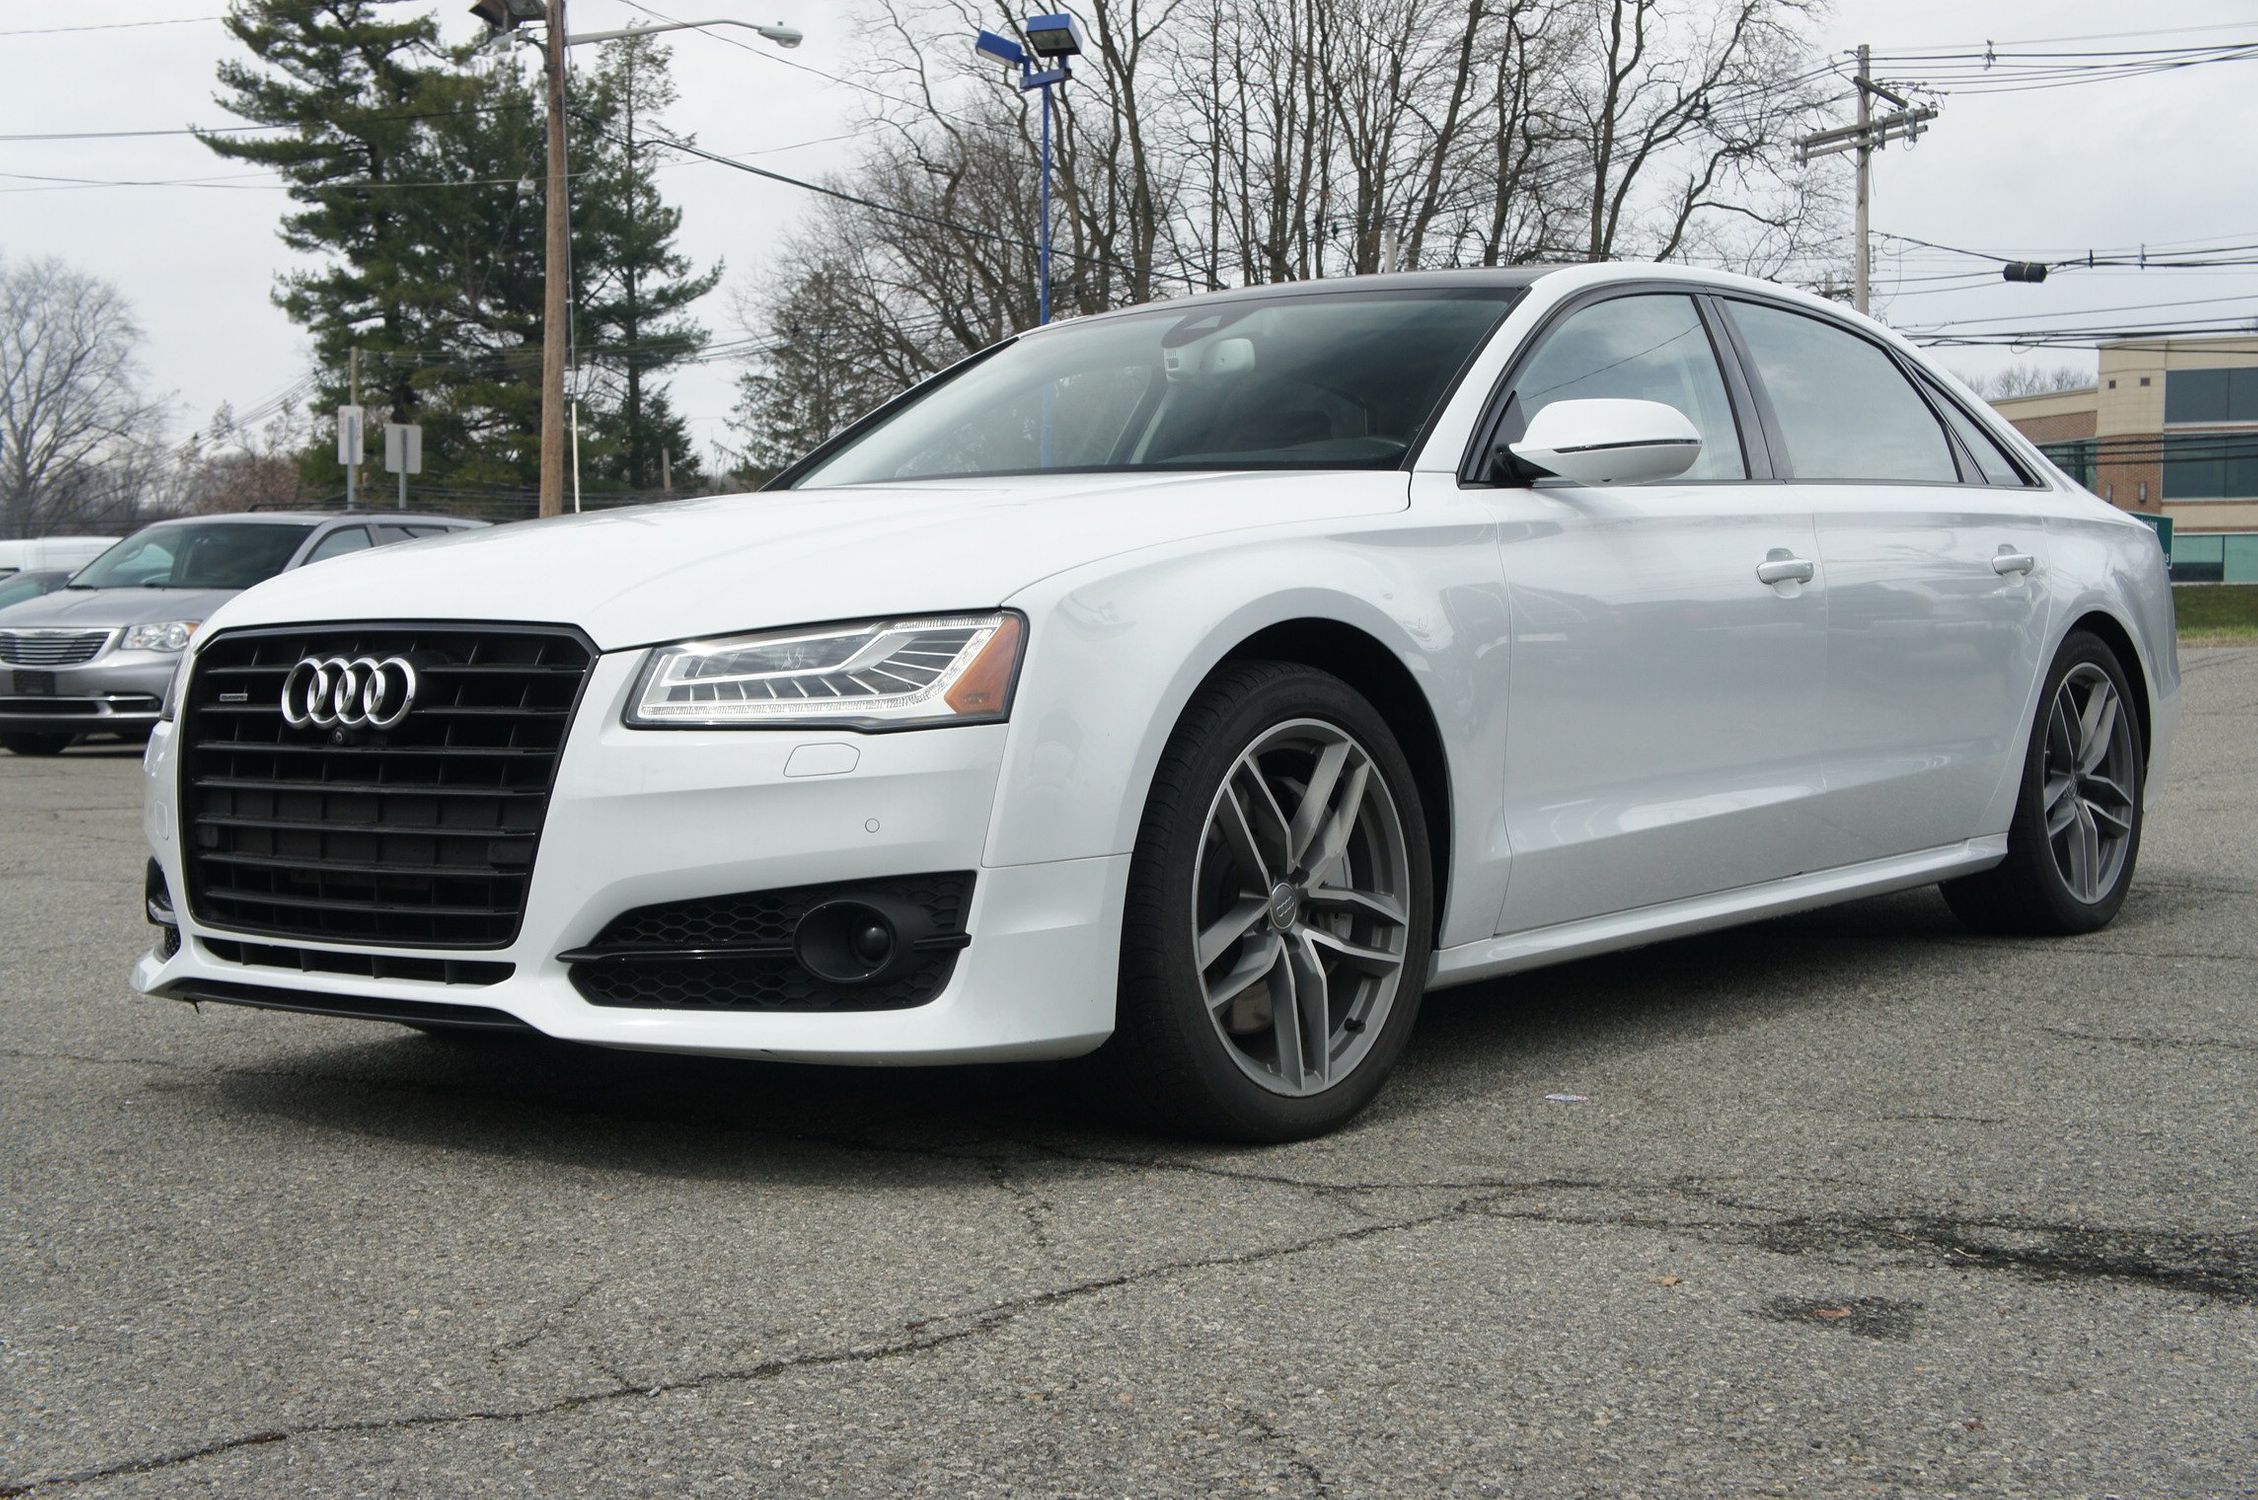 2017 Audi A8 L 4.0T quattro Sport | Zoom Auto Group - Used Cars New Jersey